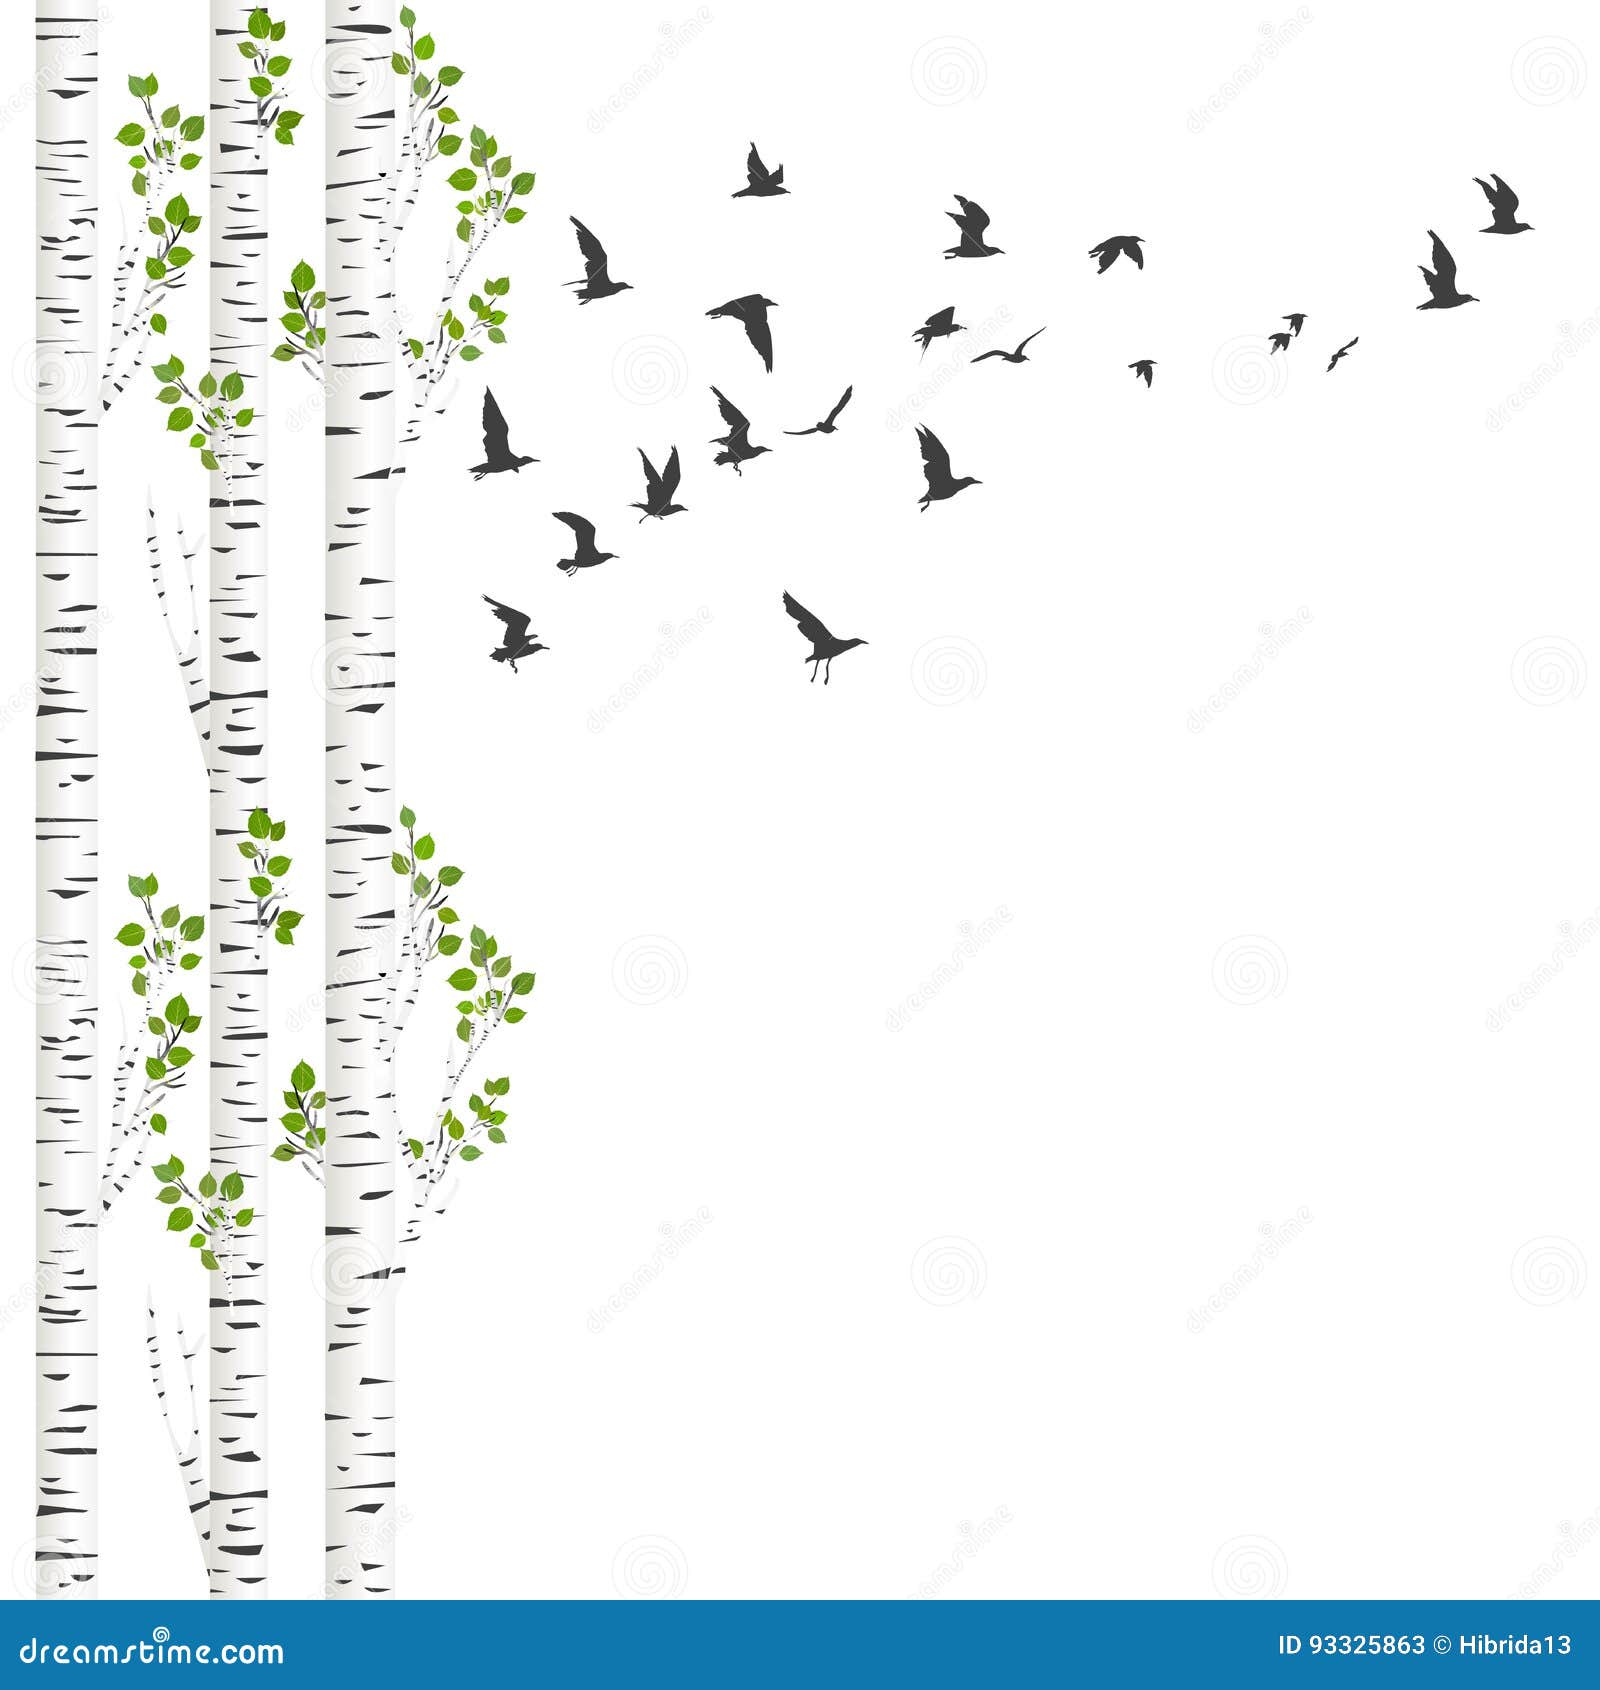 background with birch trees and birds